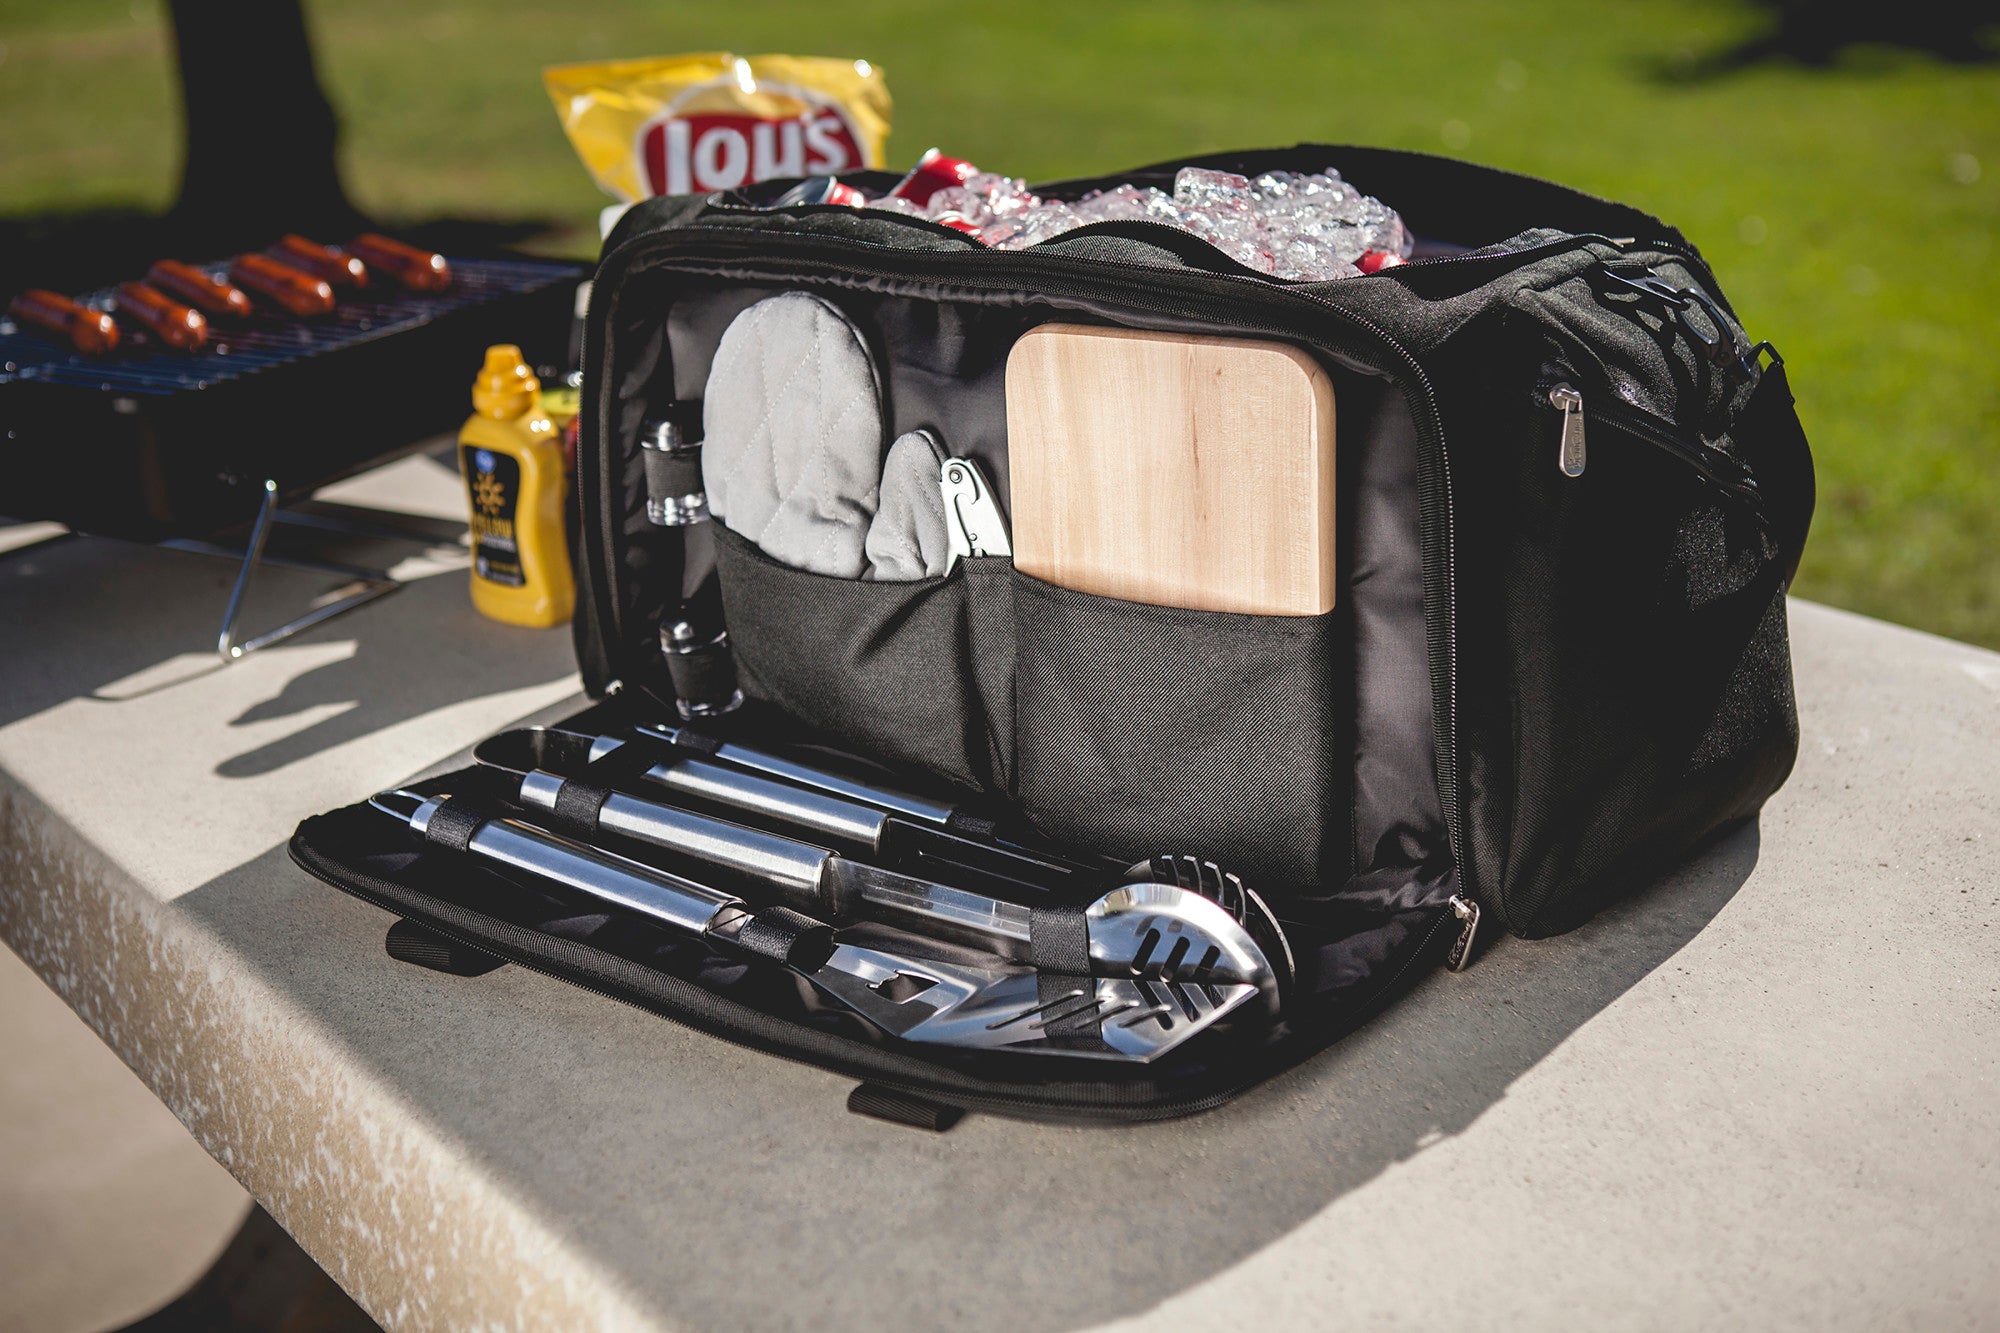 Purdue Boilermakers - BBQ Kit Grill Set & Cooler